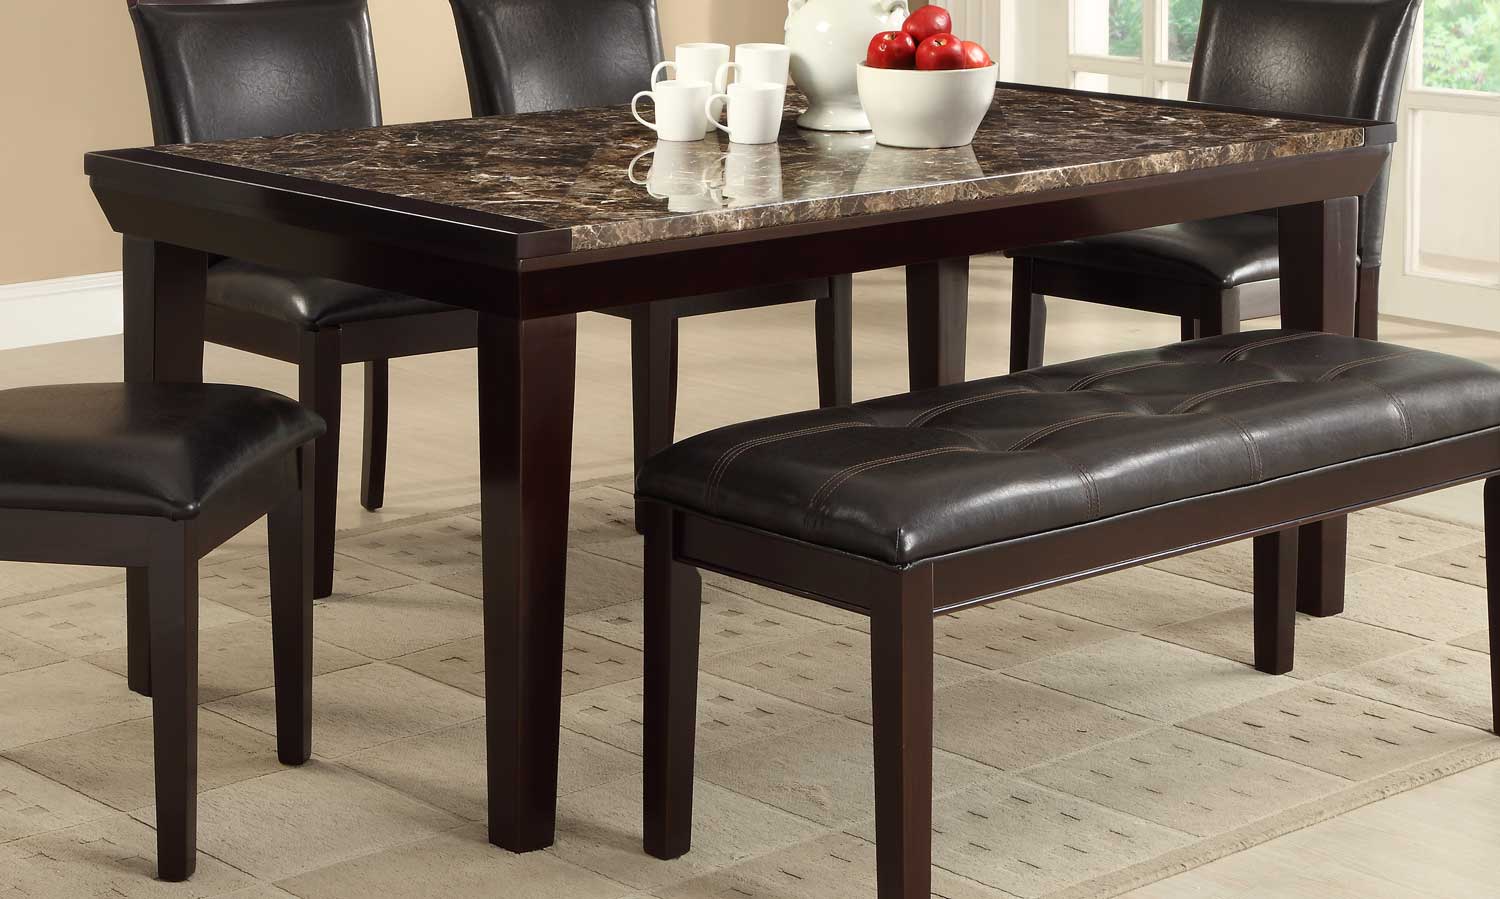 Homelegance Thurston Faux Marble Dining Table - Espresso